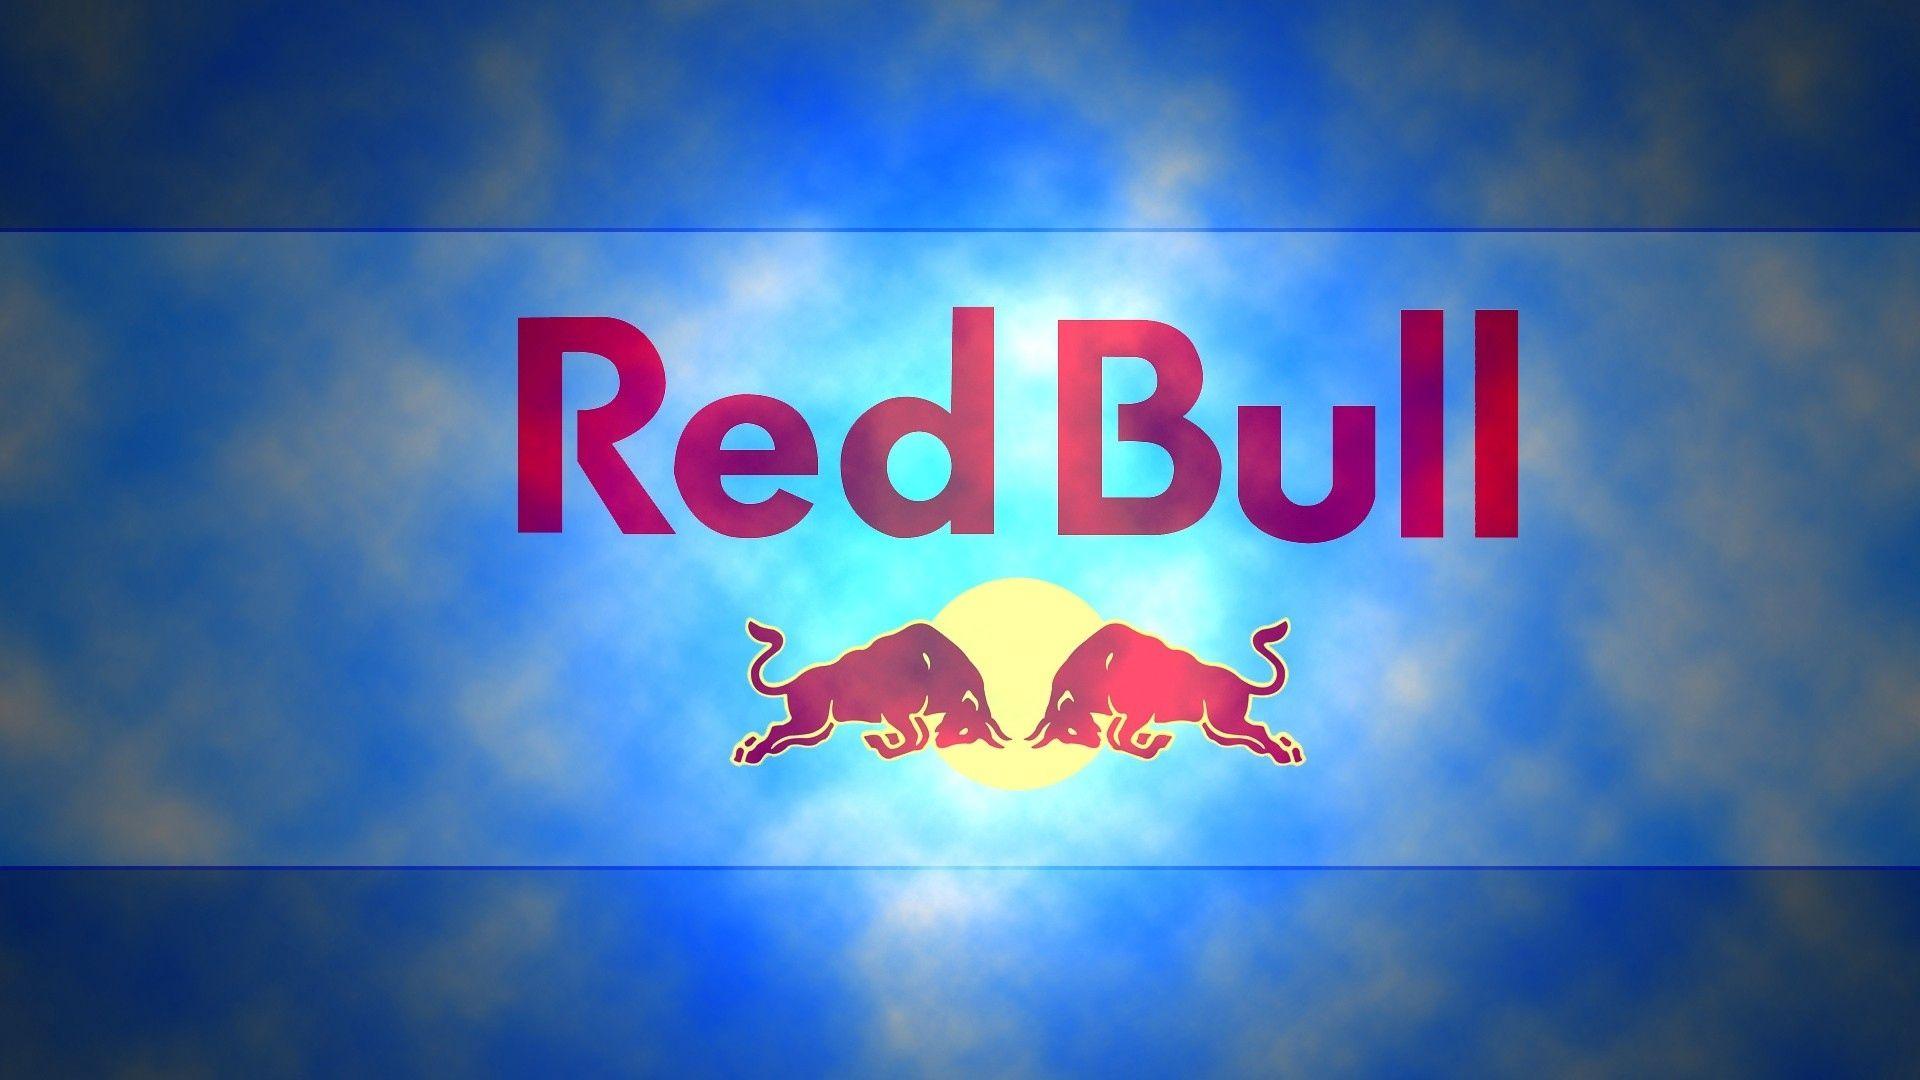 Download wallpaper 1920x1080 red bull, energy, drink, firm HD background